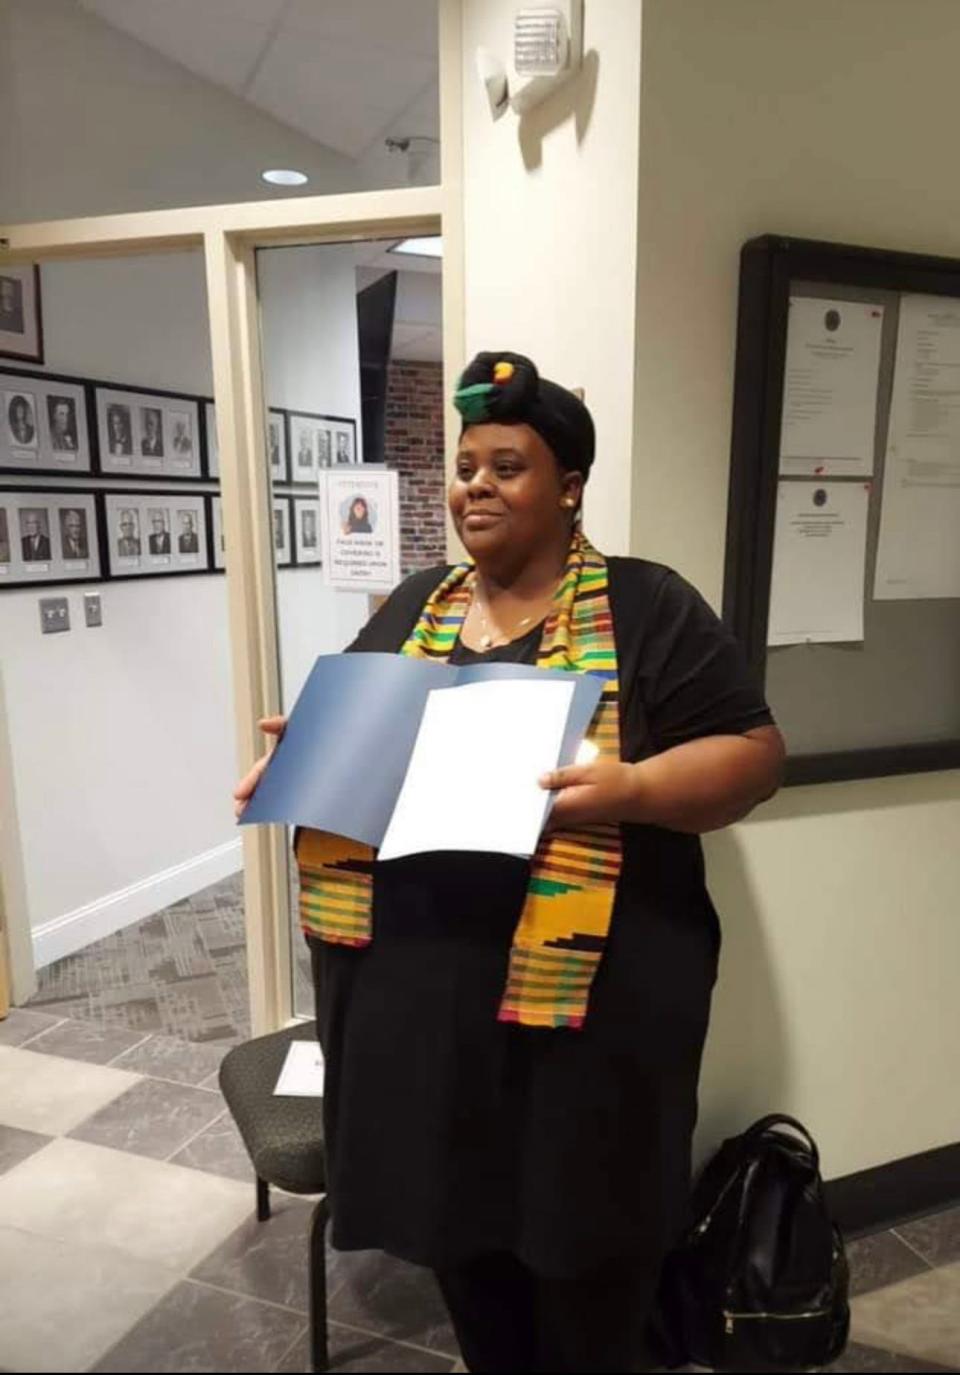 Crystal Cauley holds the first Kwanzaa Proclamation for the city of Brevard from Brevard Mayor Maureen Copelof.